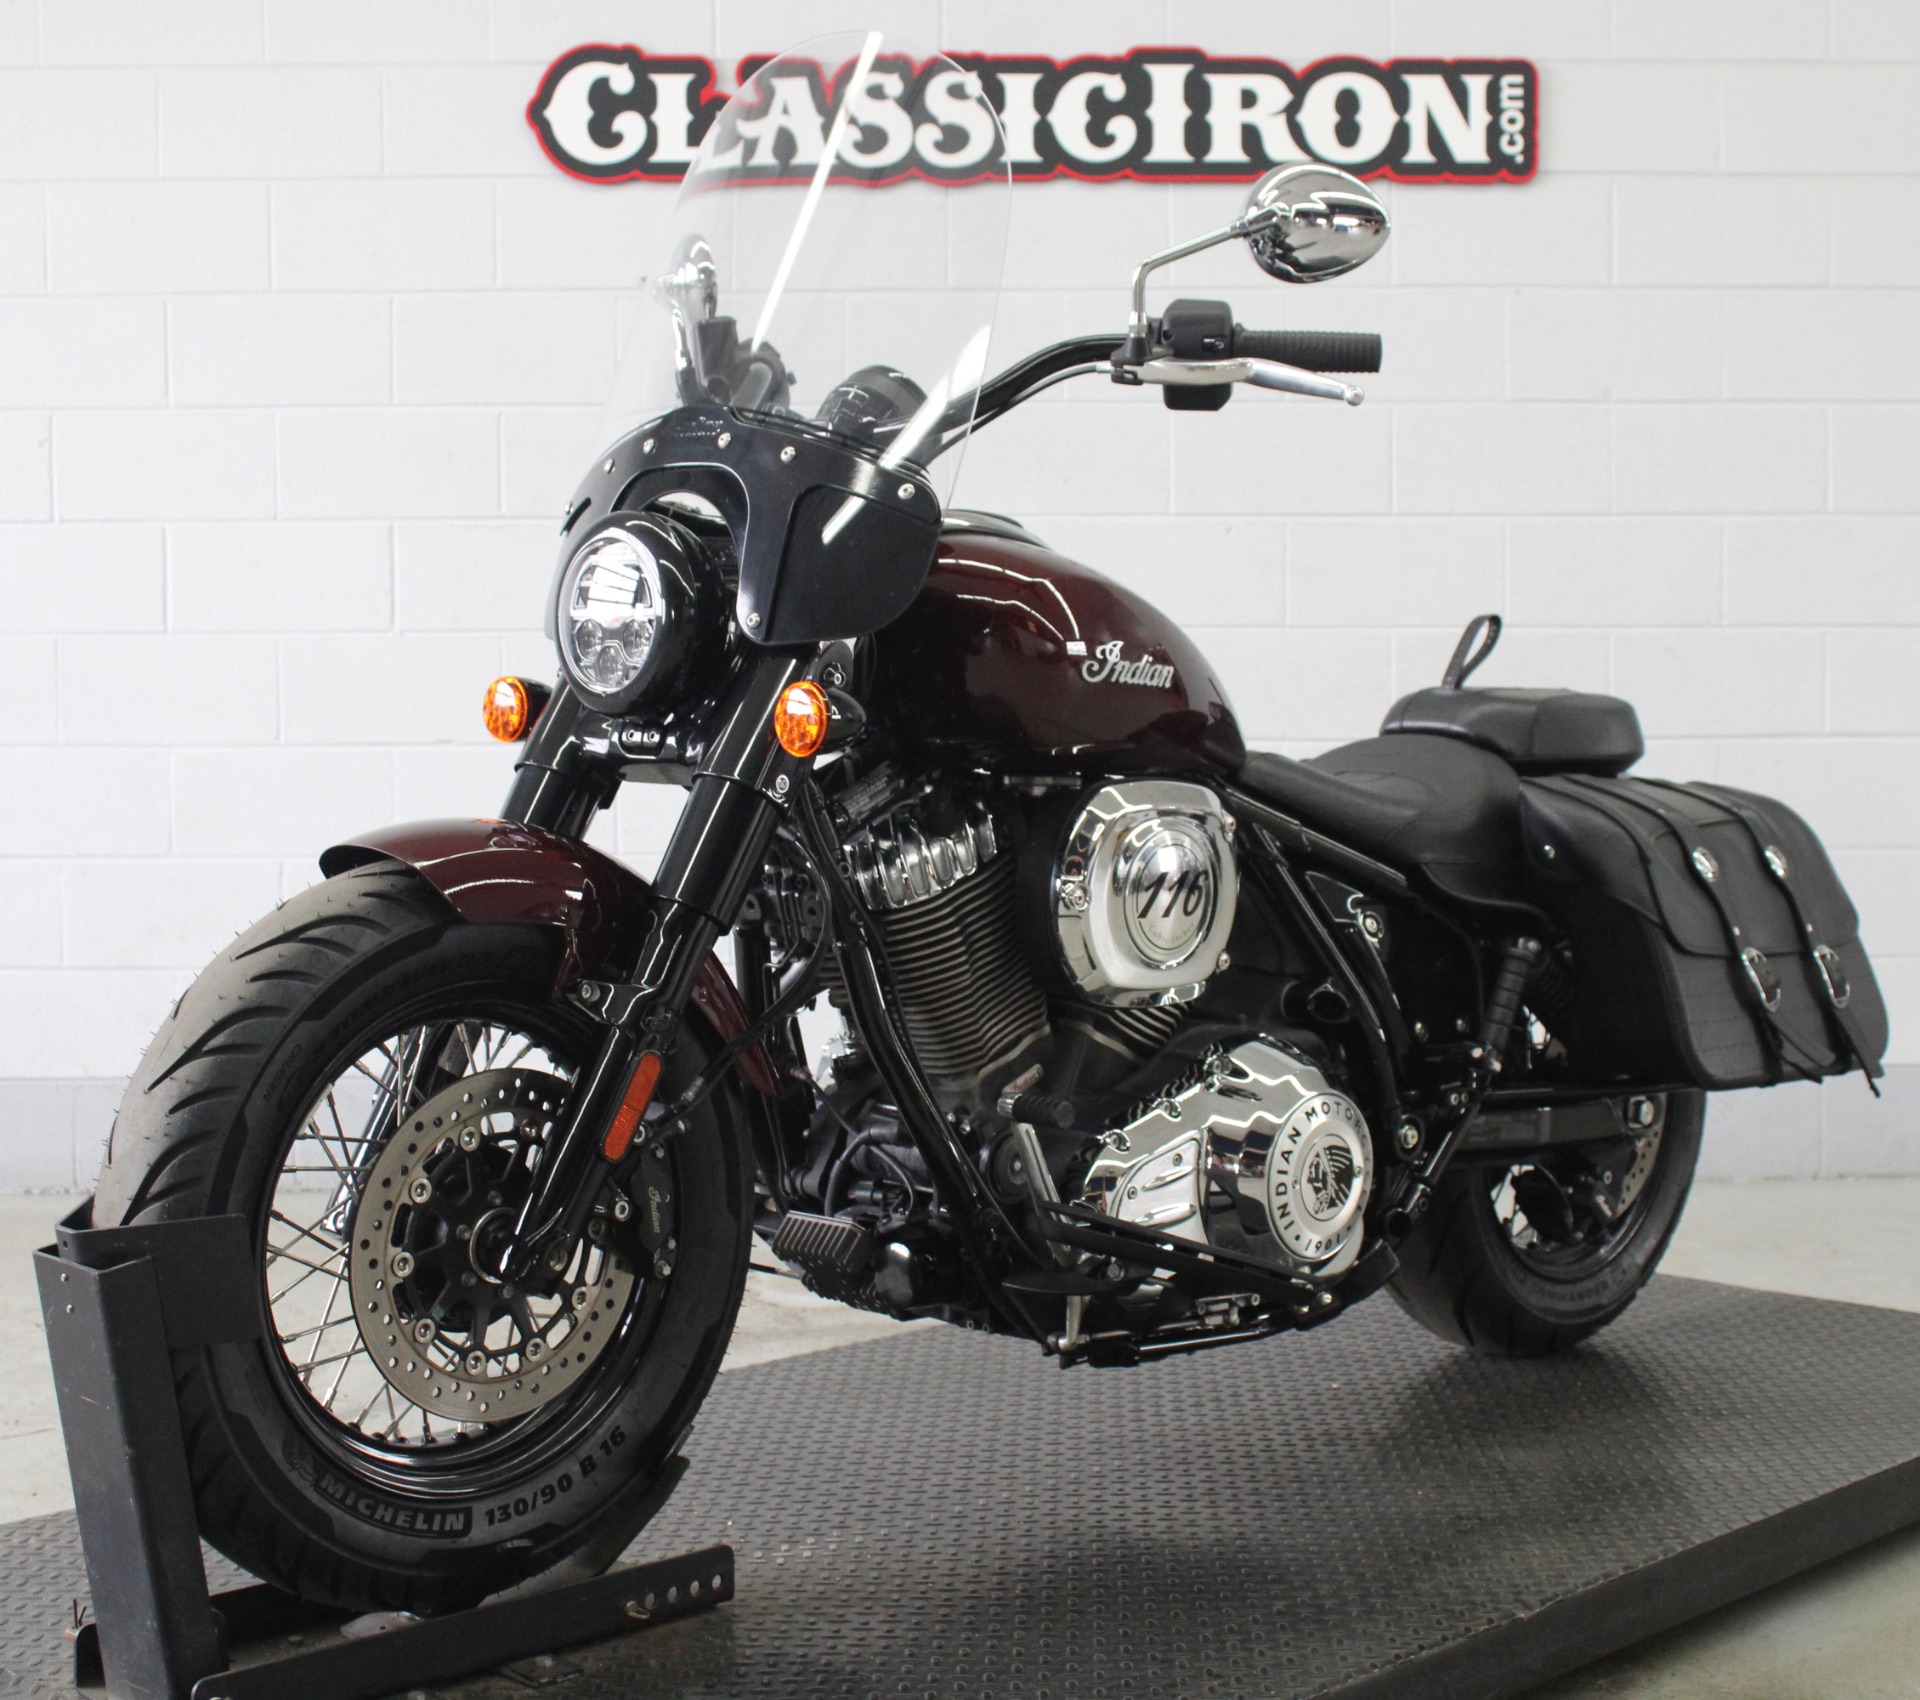 2022 Indian Motorcycle Super Chief Limited ABS in Fredericksburg, Virginia - Photo 3